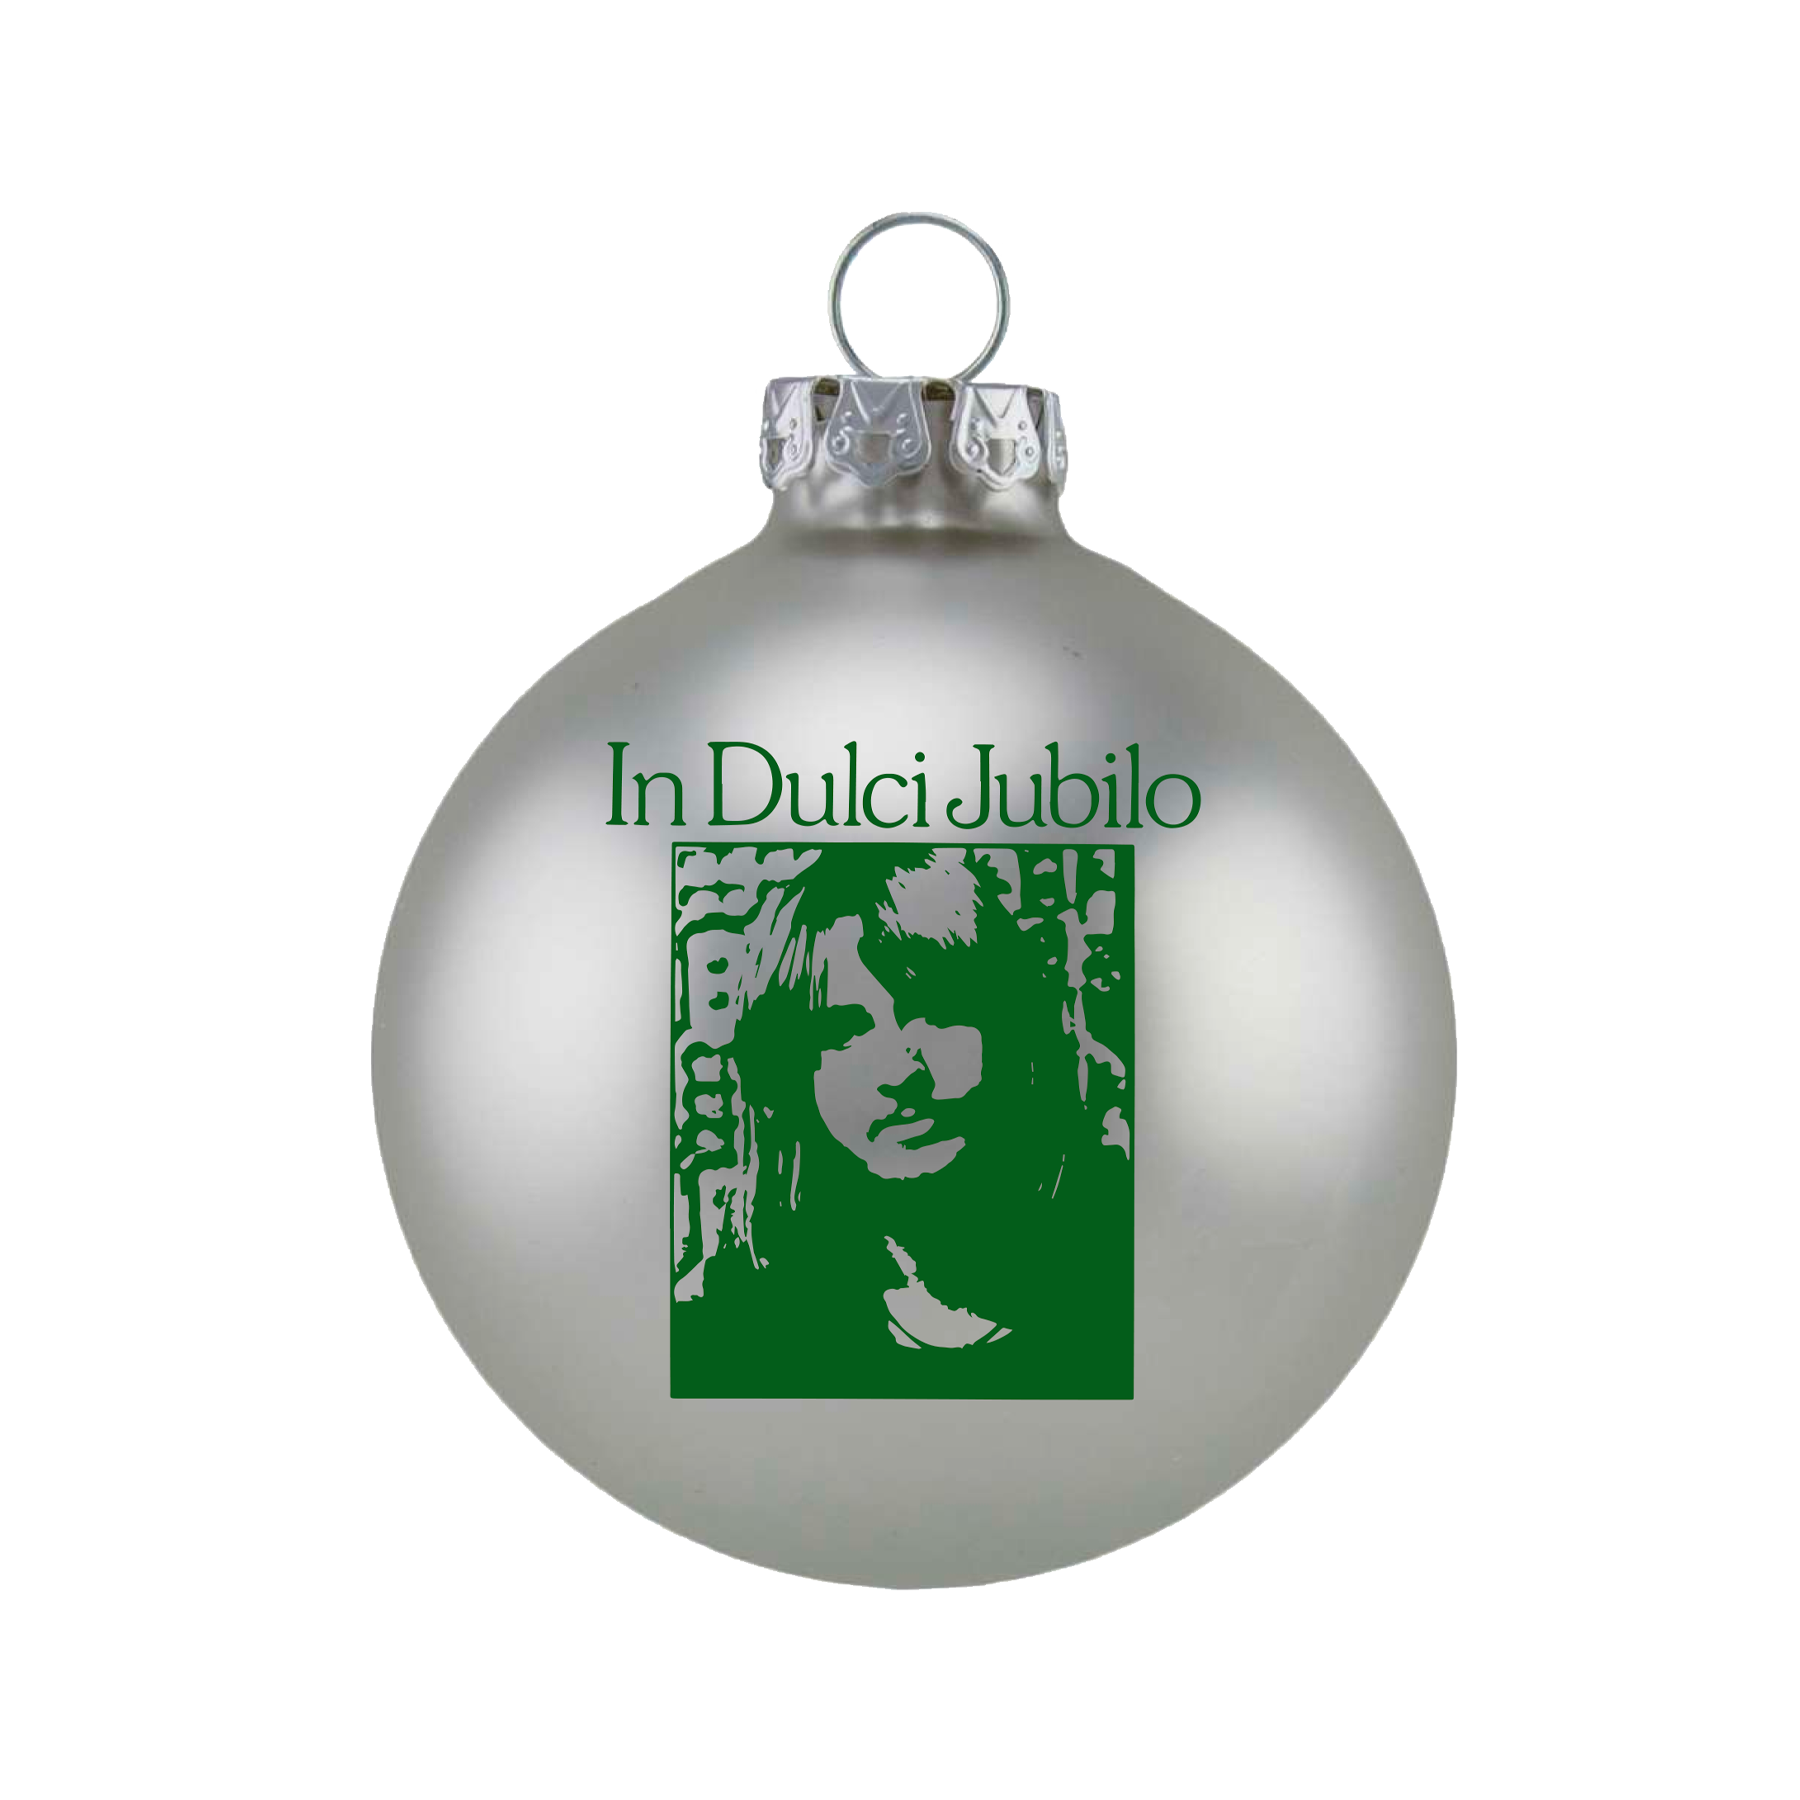 Mike Oldfield - Official In Dulci Jubilo Christmas Bauble